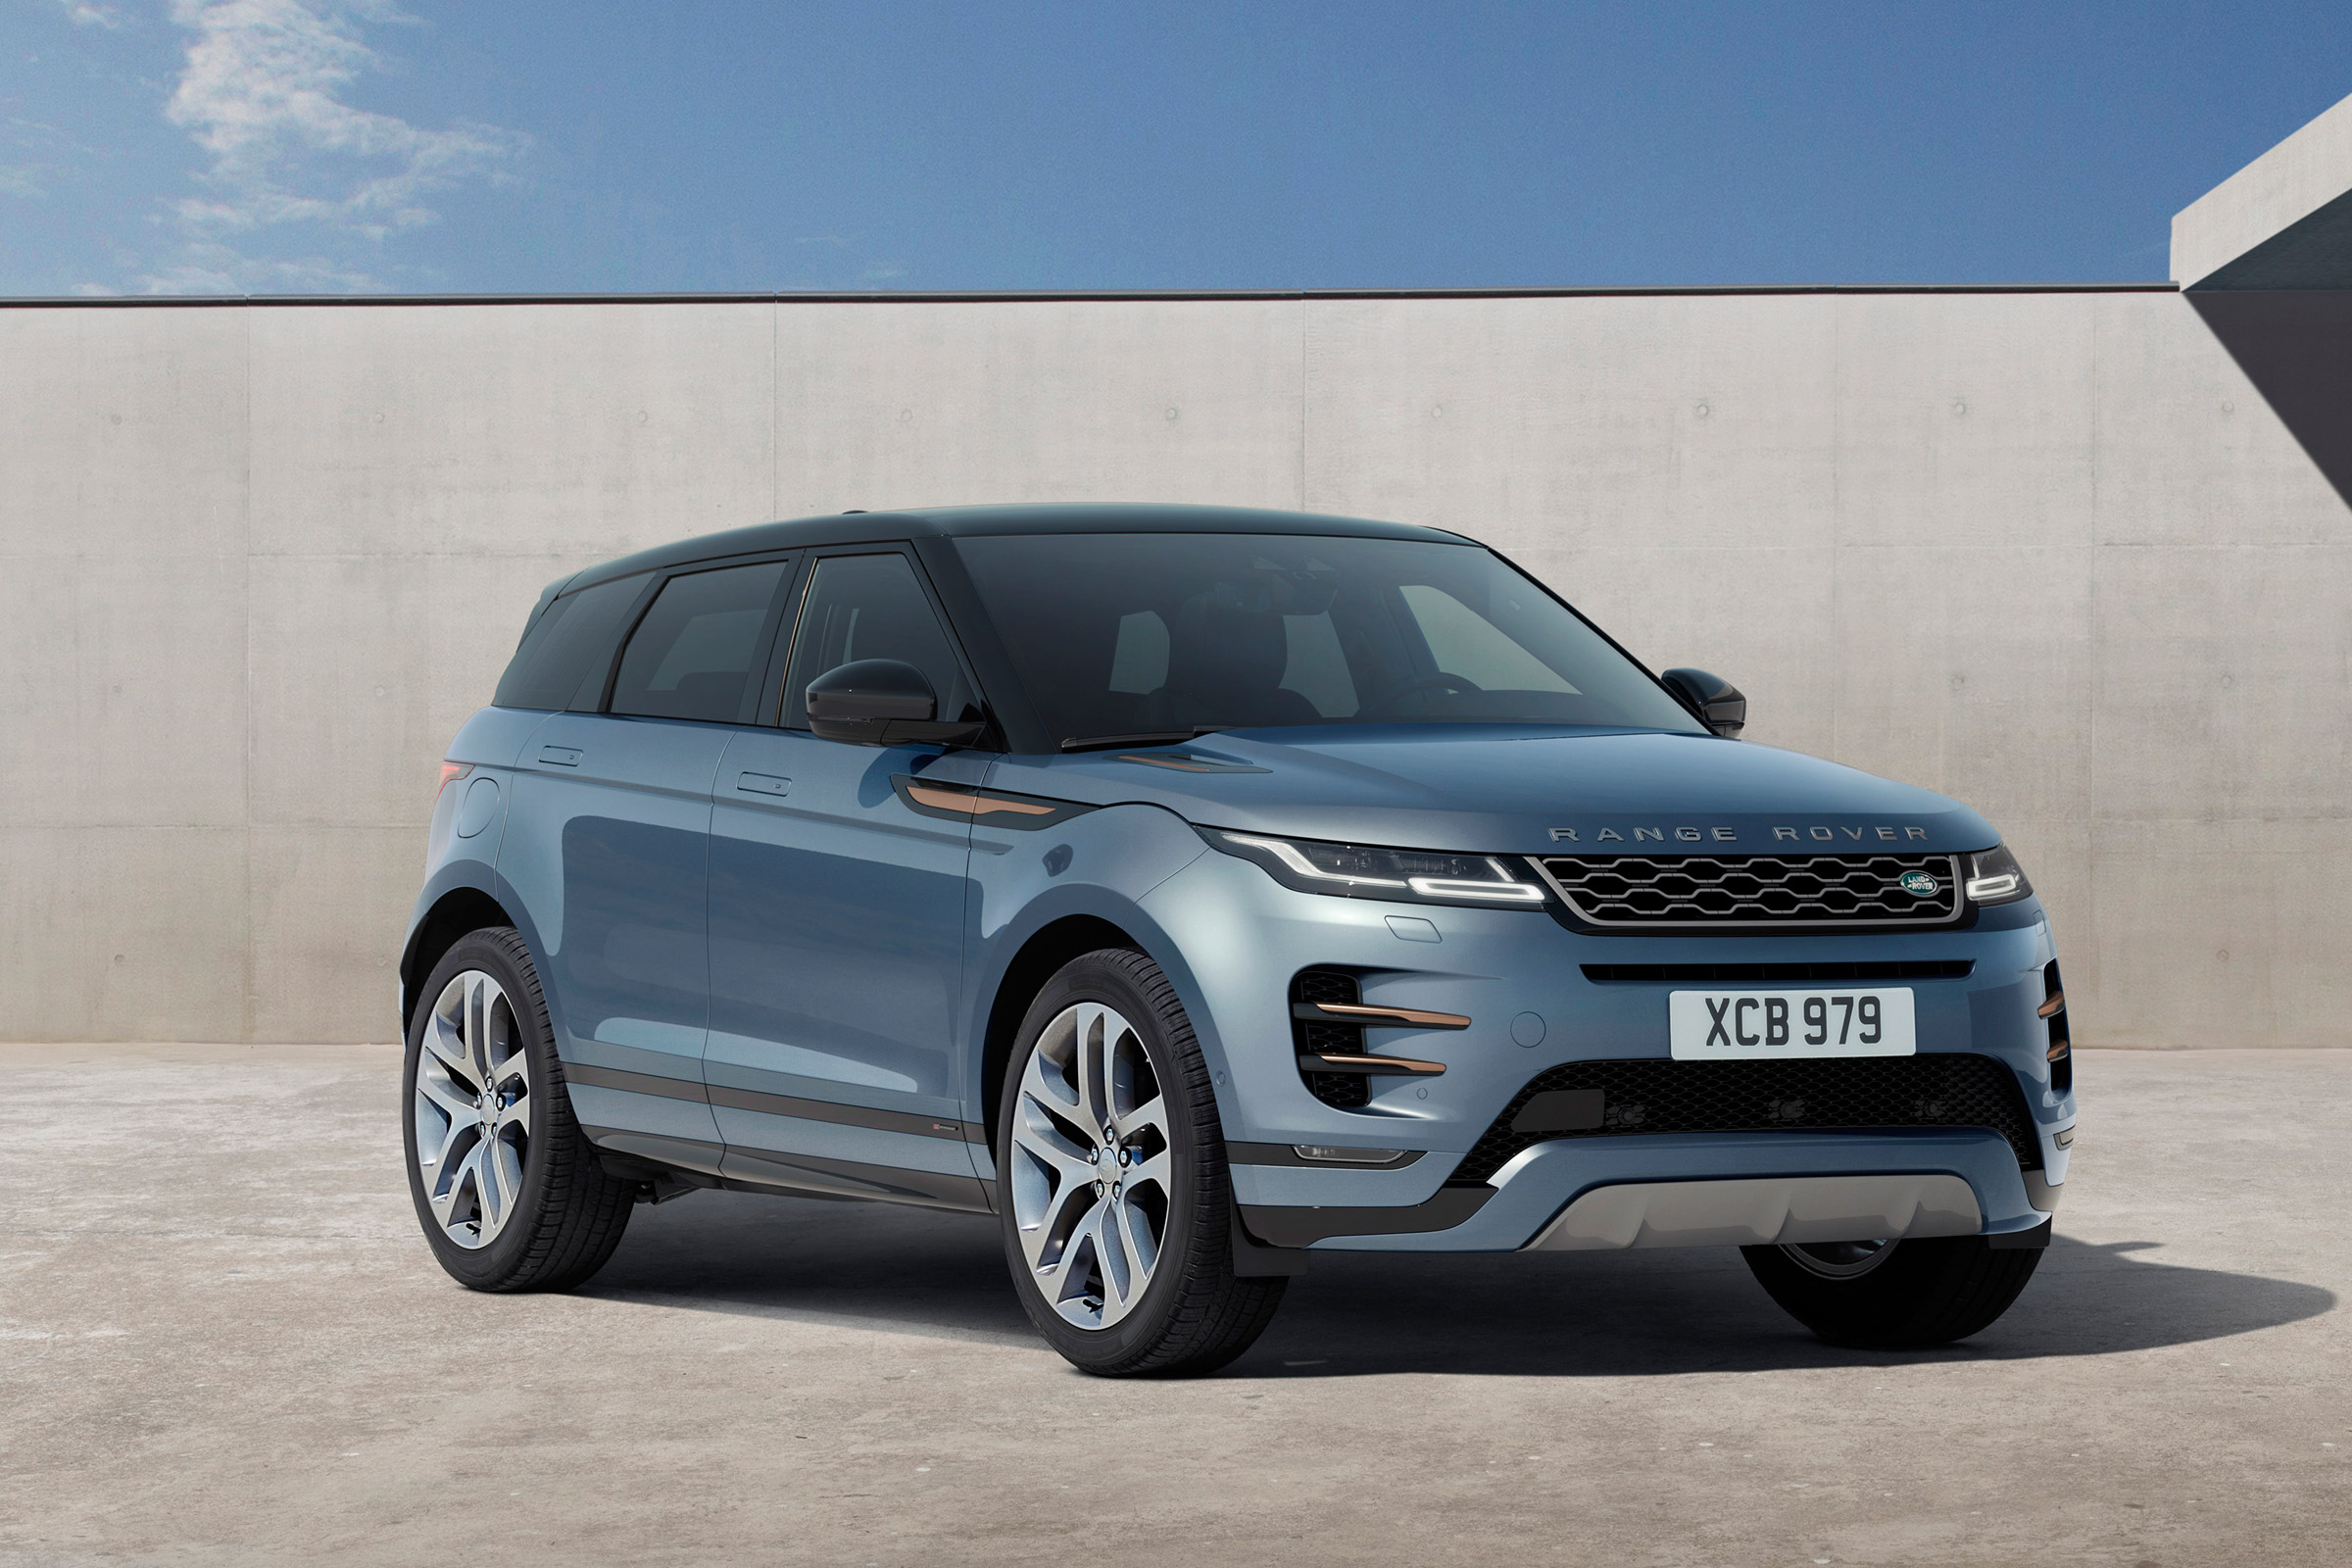 New 2019 Range Rover Evoque On Sale Now Prices Specs And Full Details